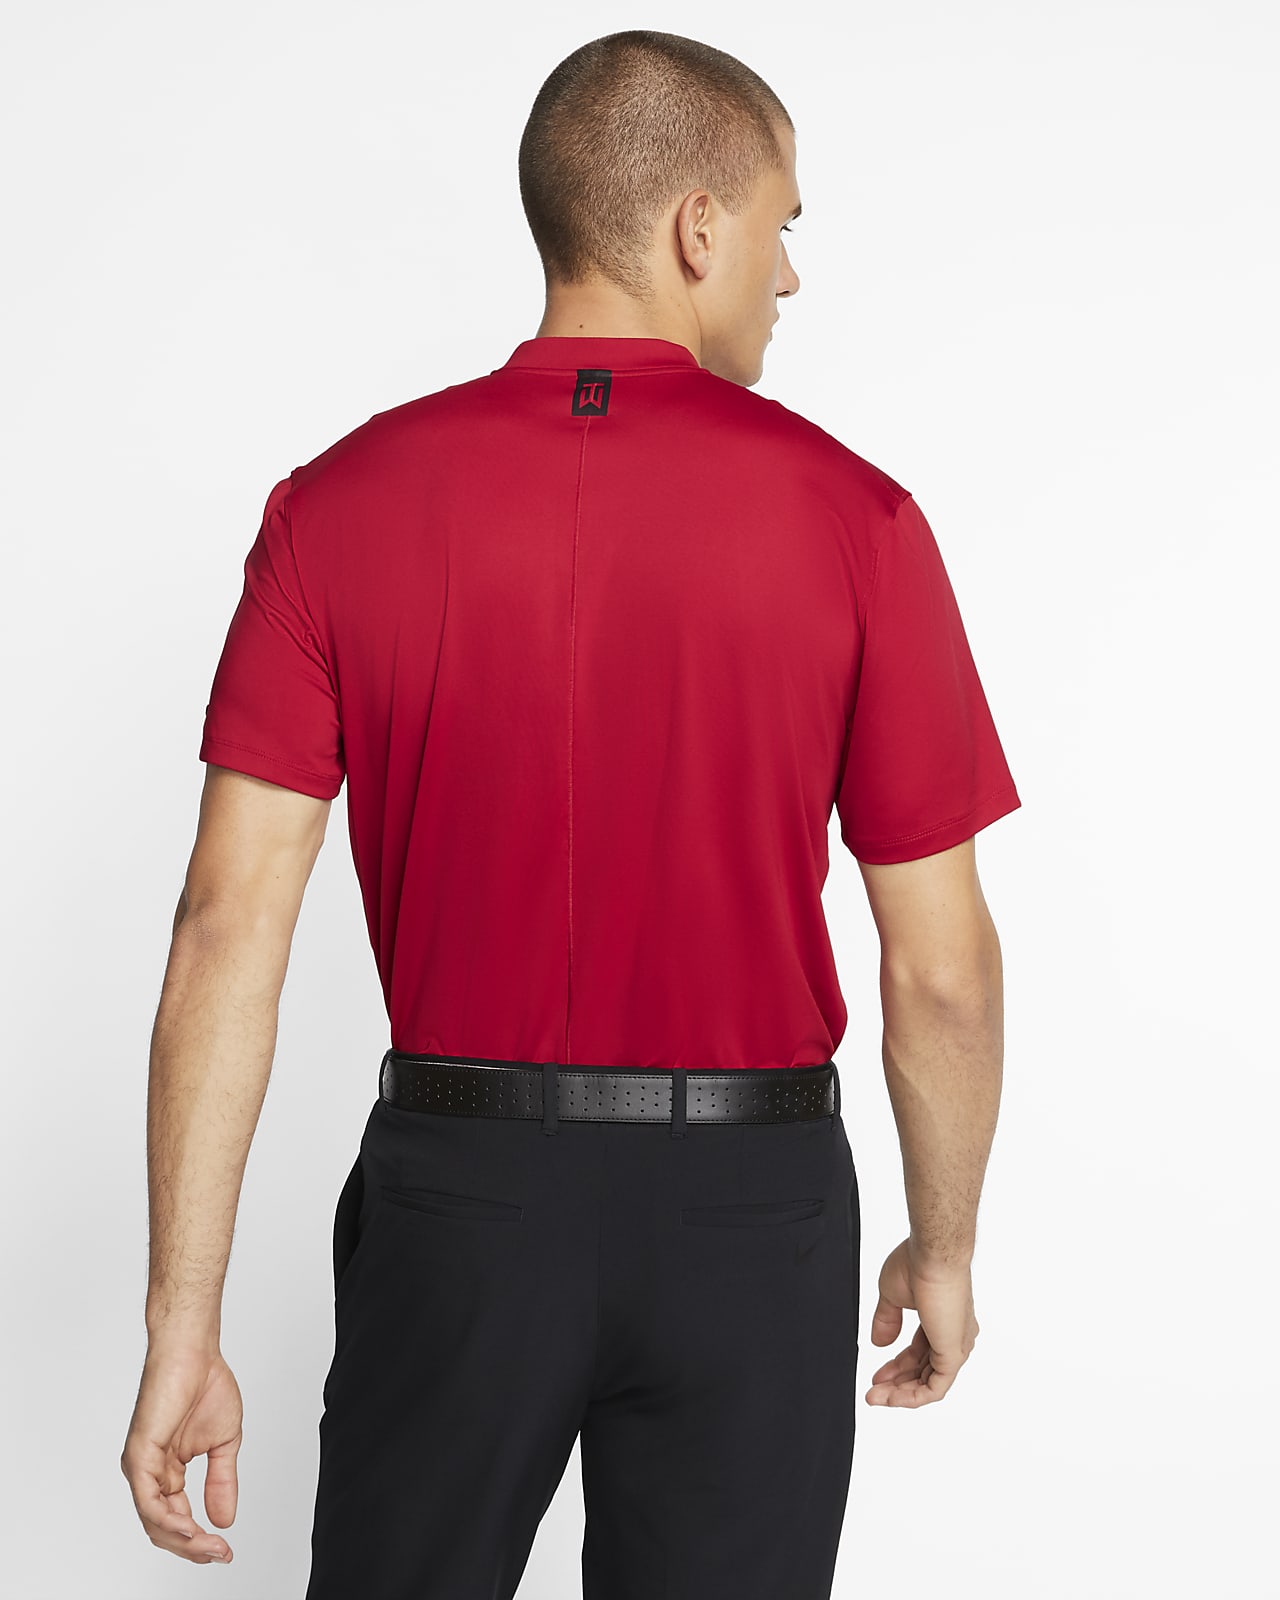 tiger woods polo shirts